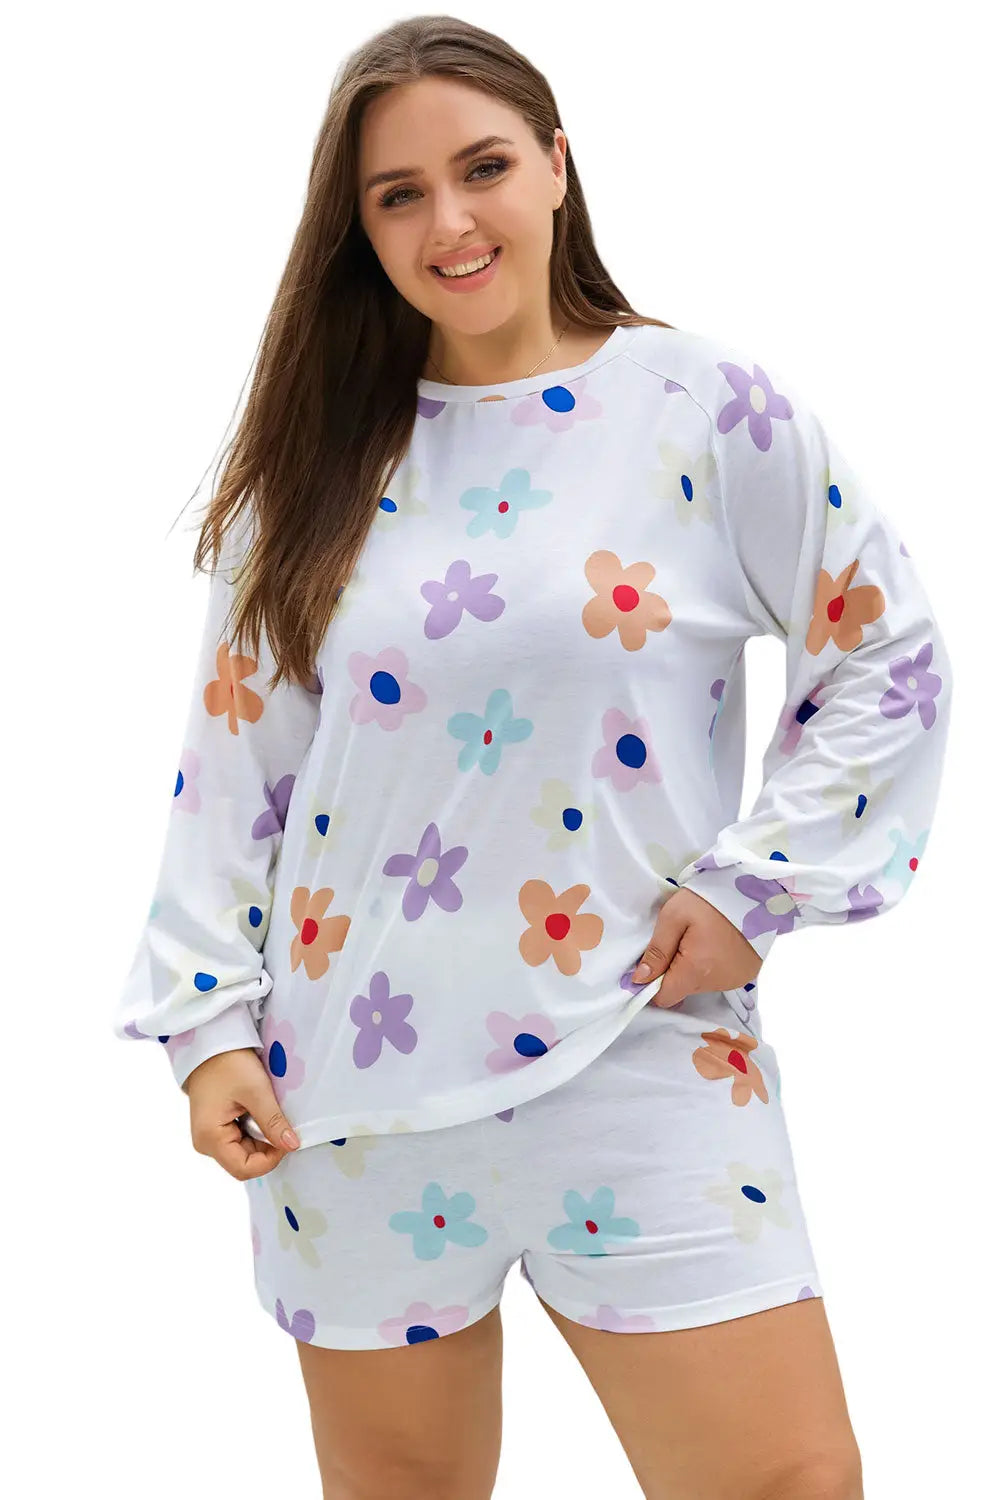 White plus size flower print raglan pullover and shorts outfit